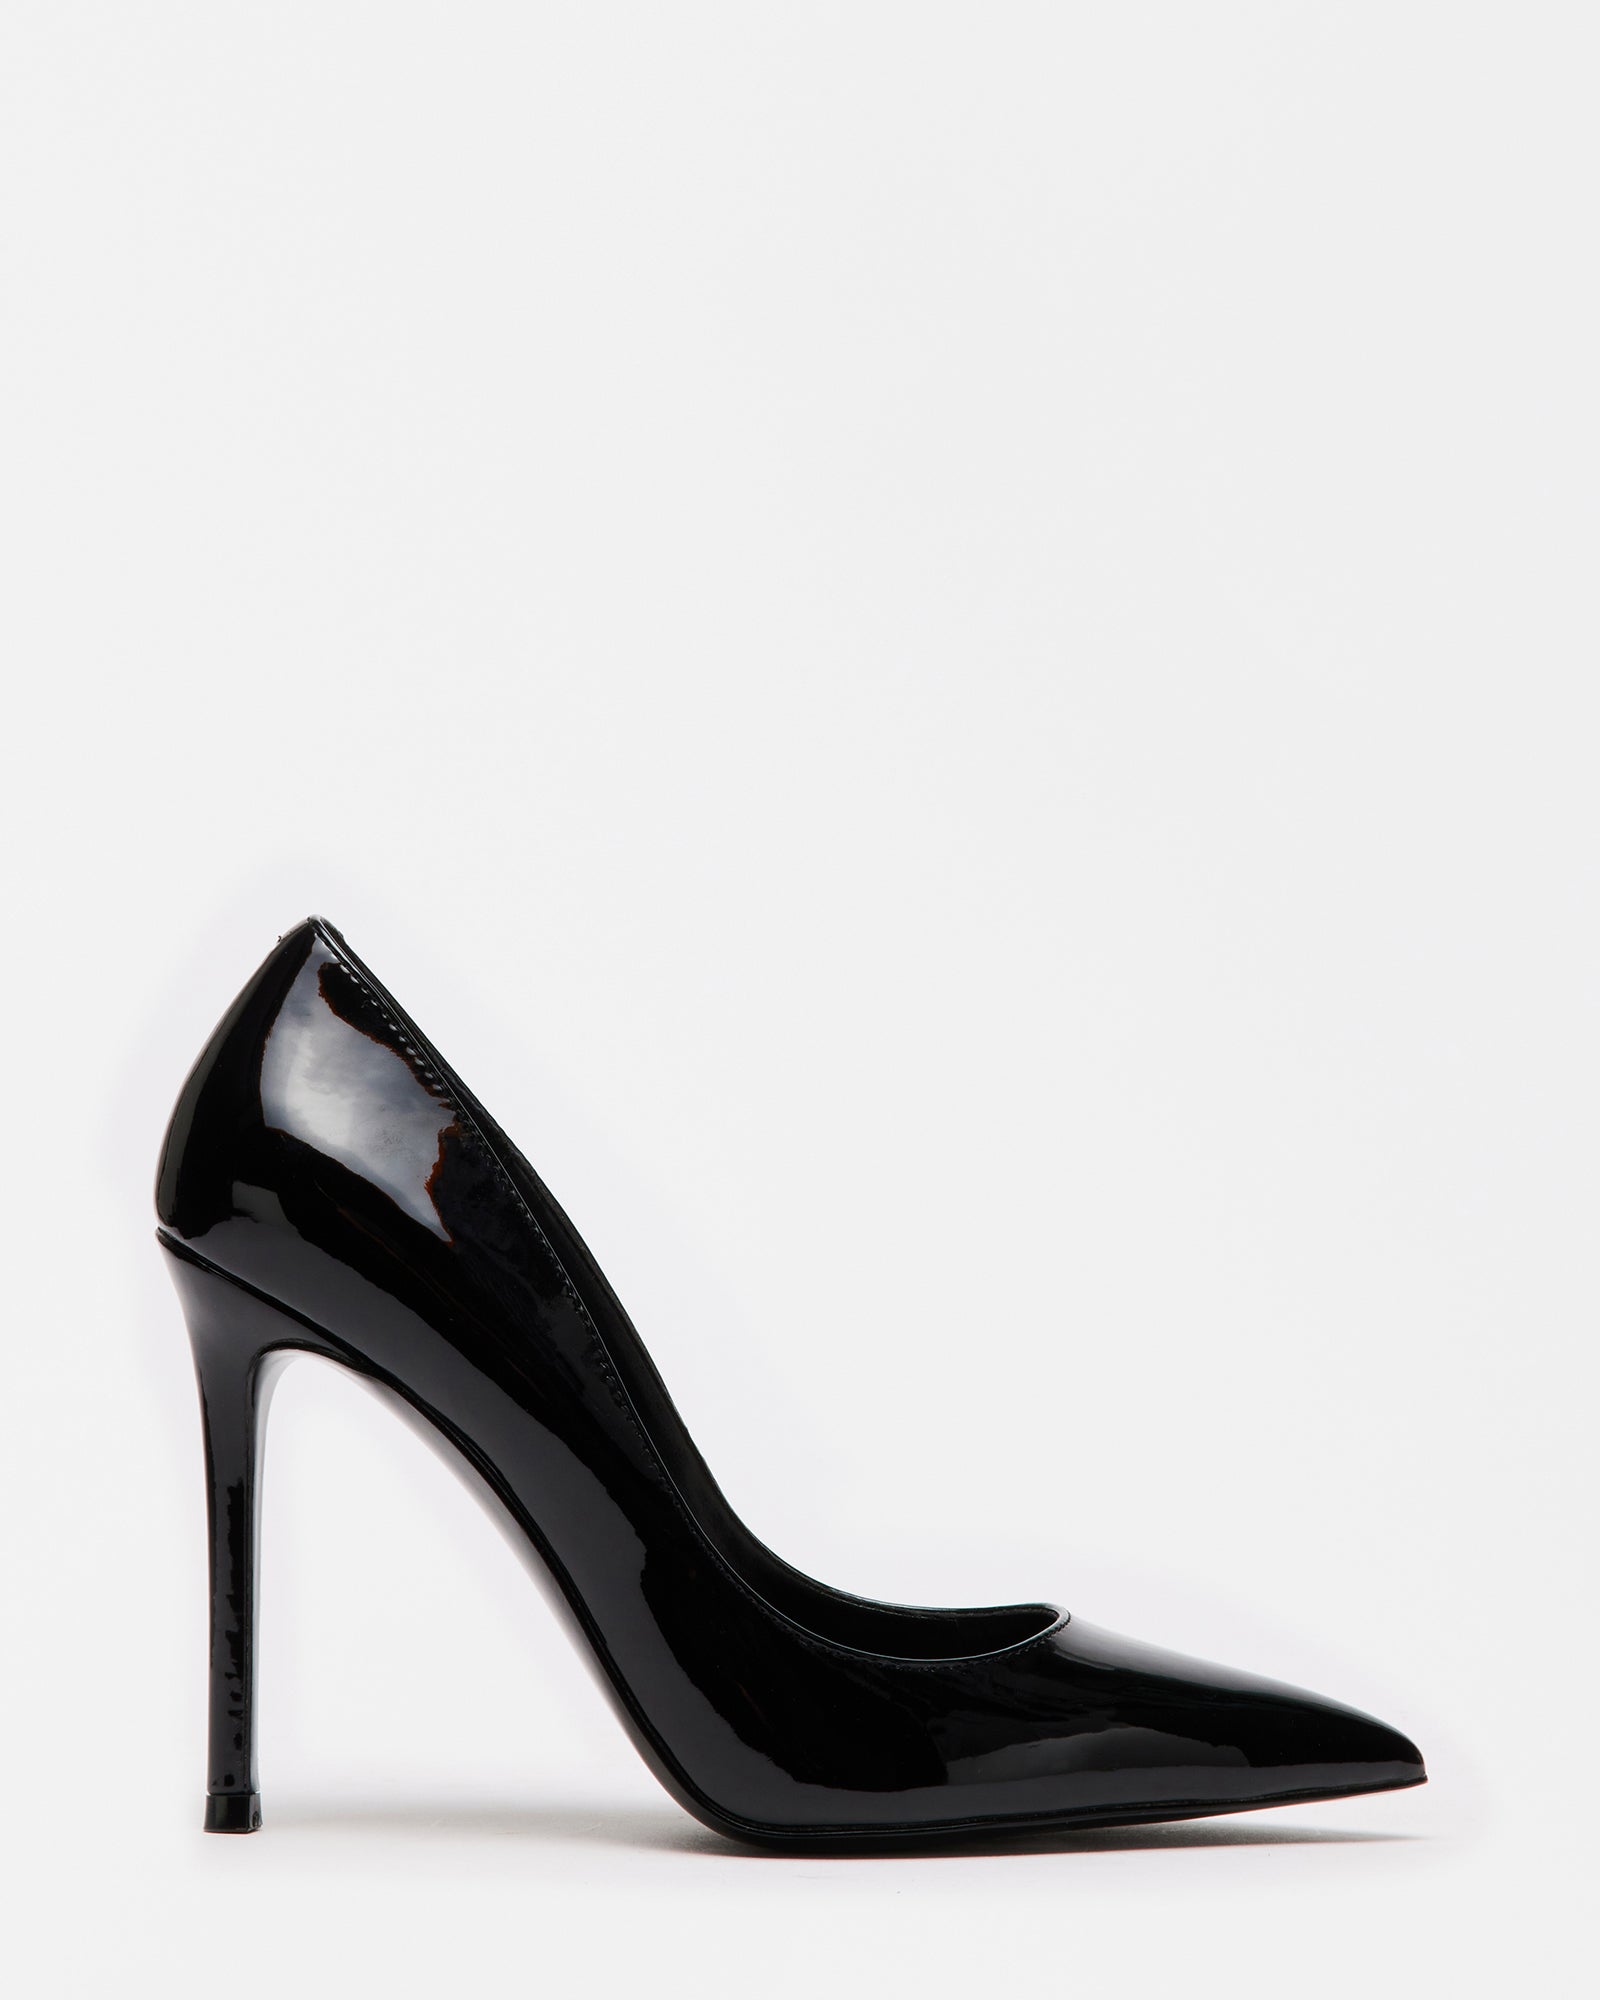 HEELS WITH ANKLE STRAP - Black | ZARA United States